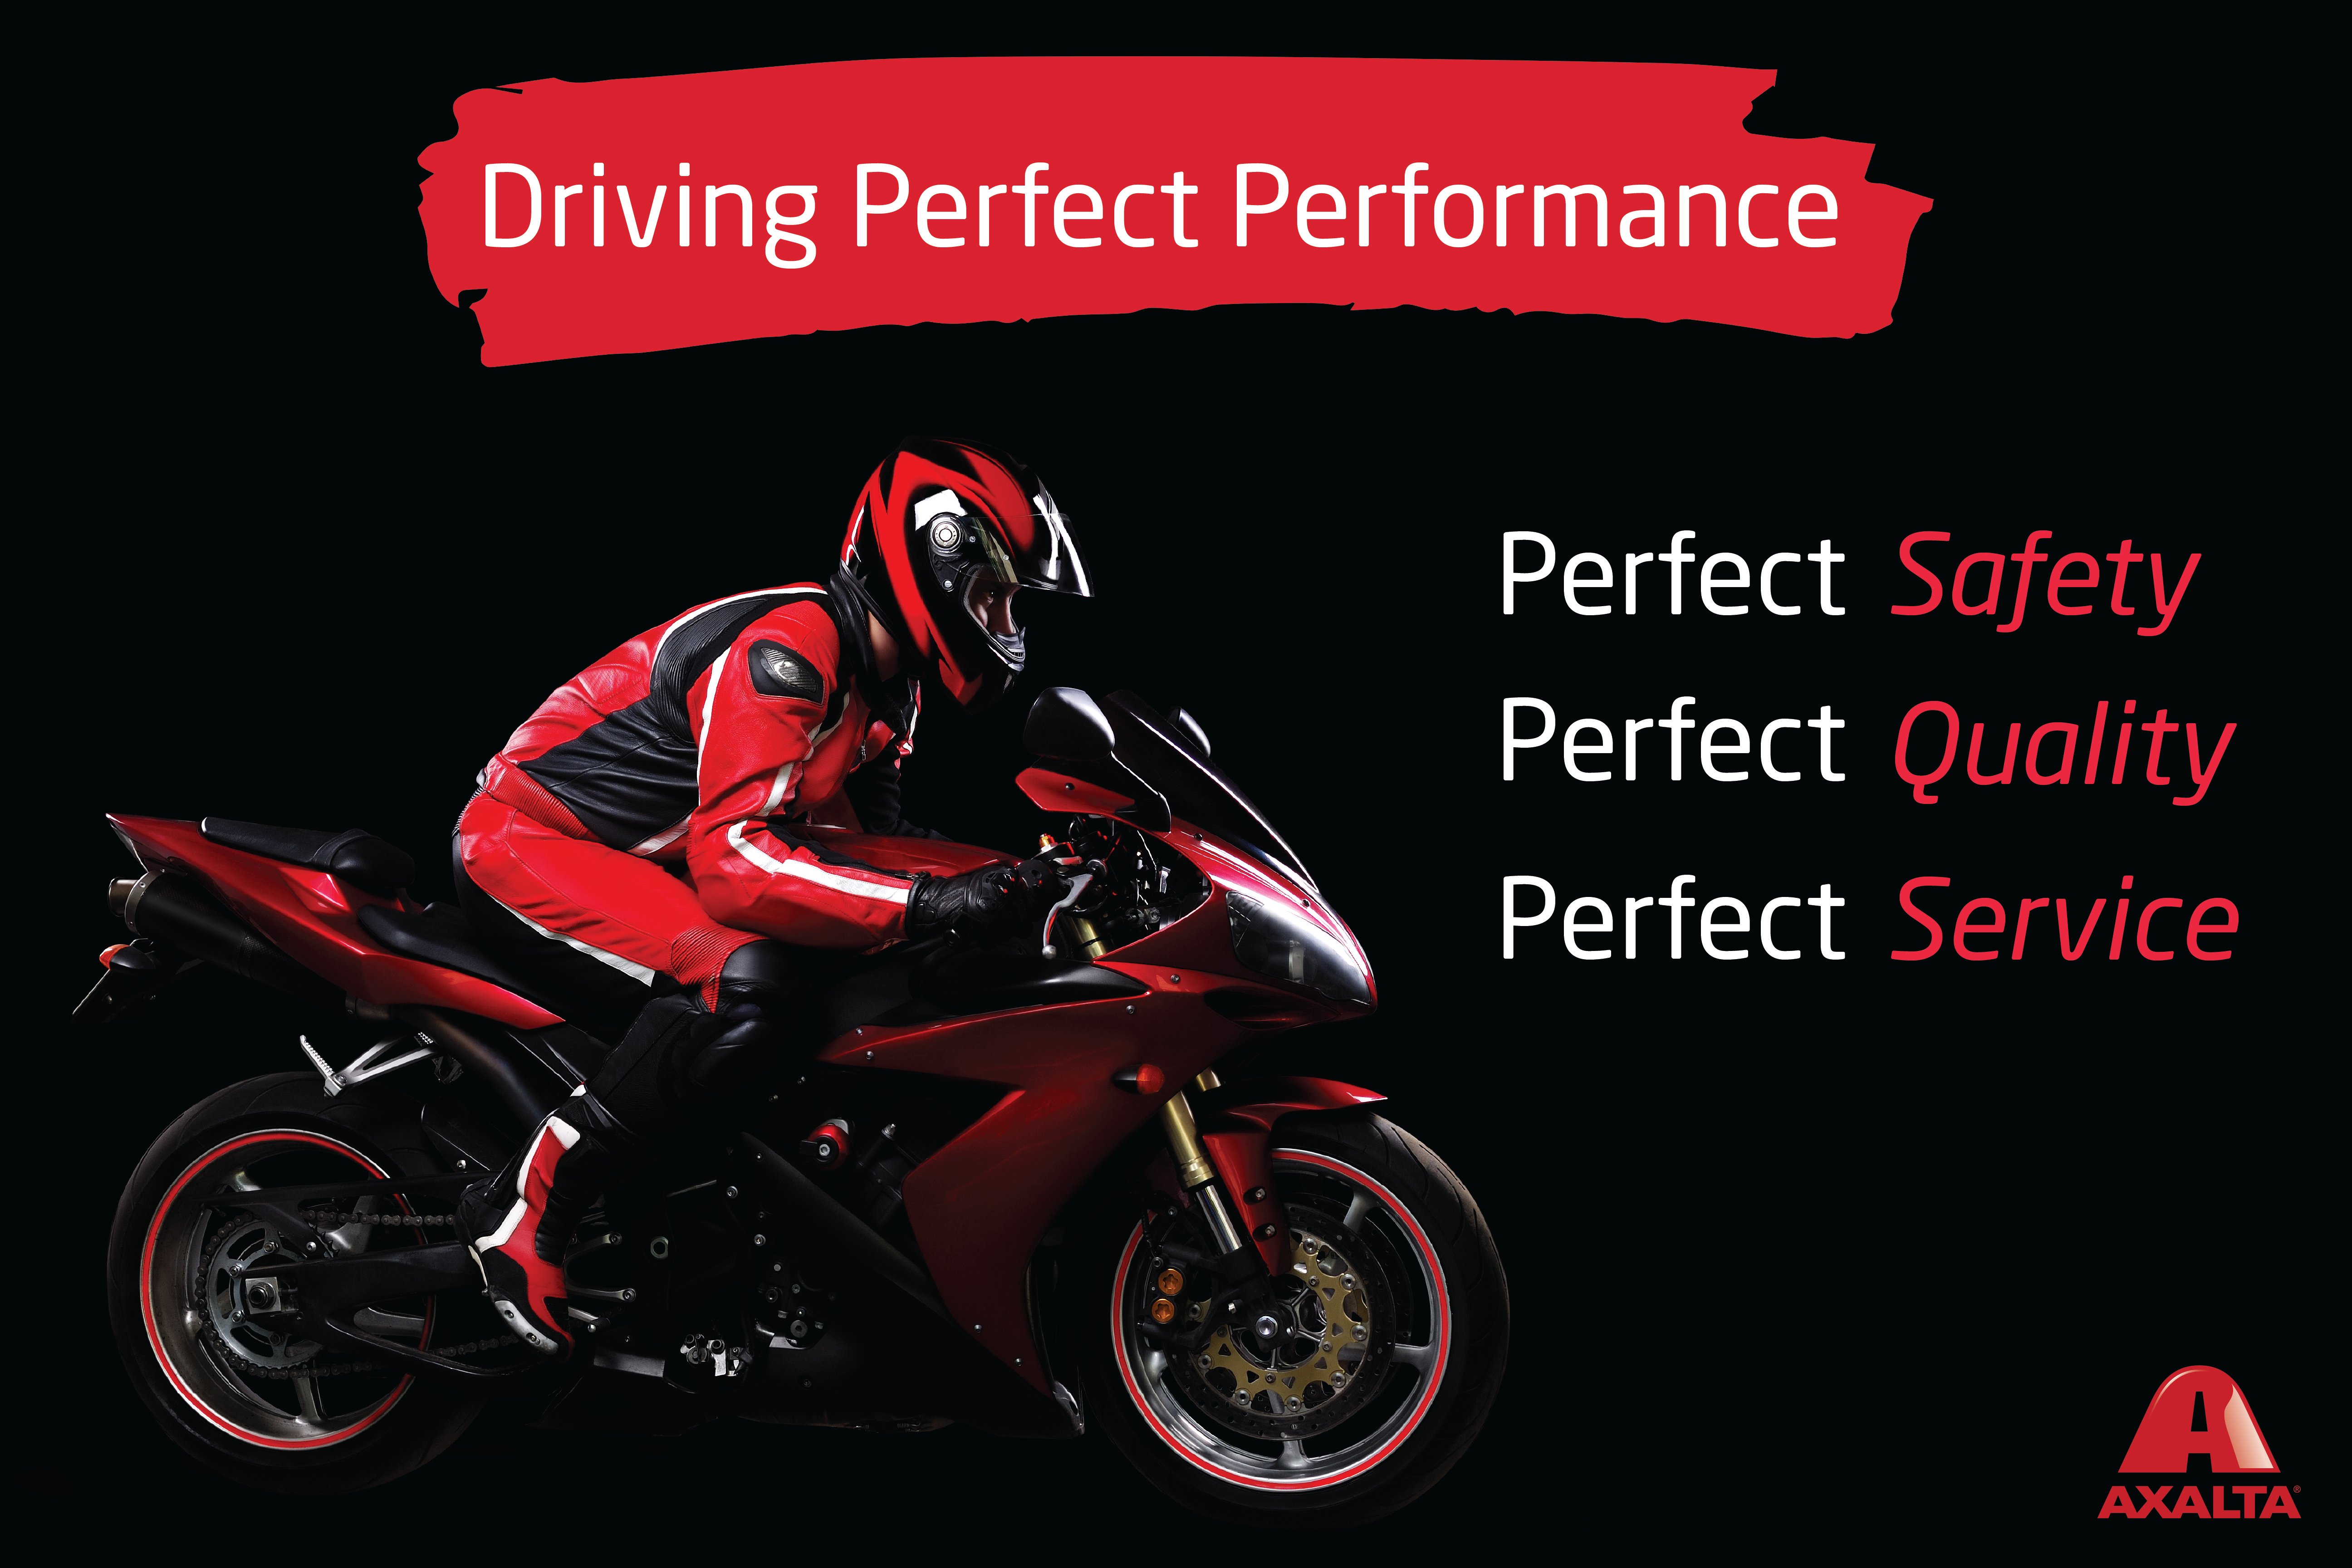 Driving Perfect Performance